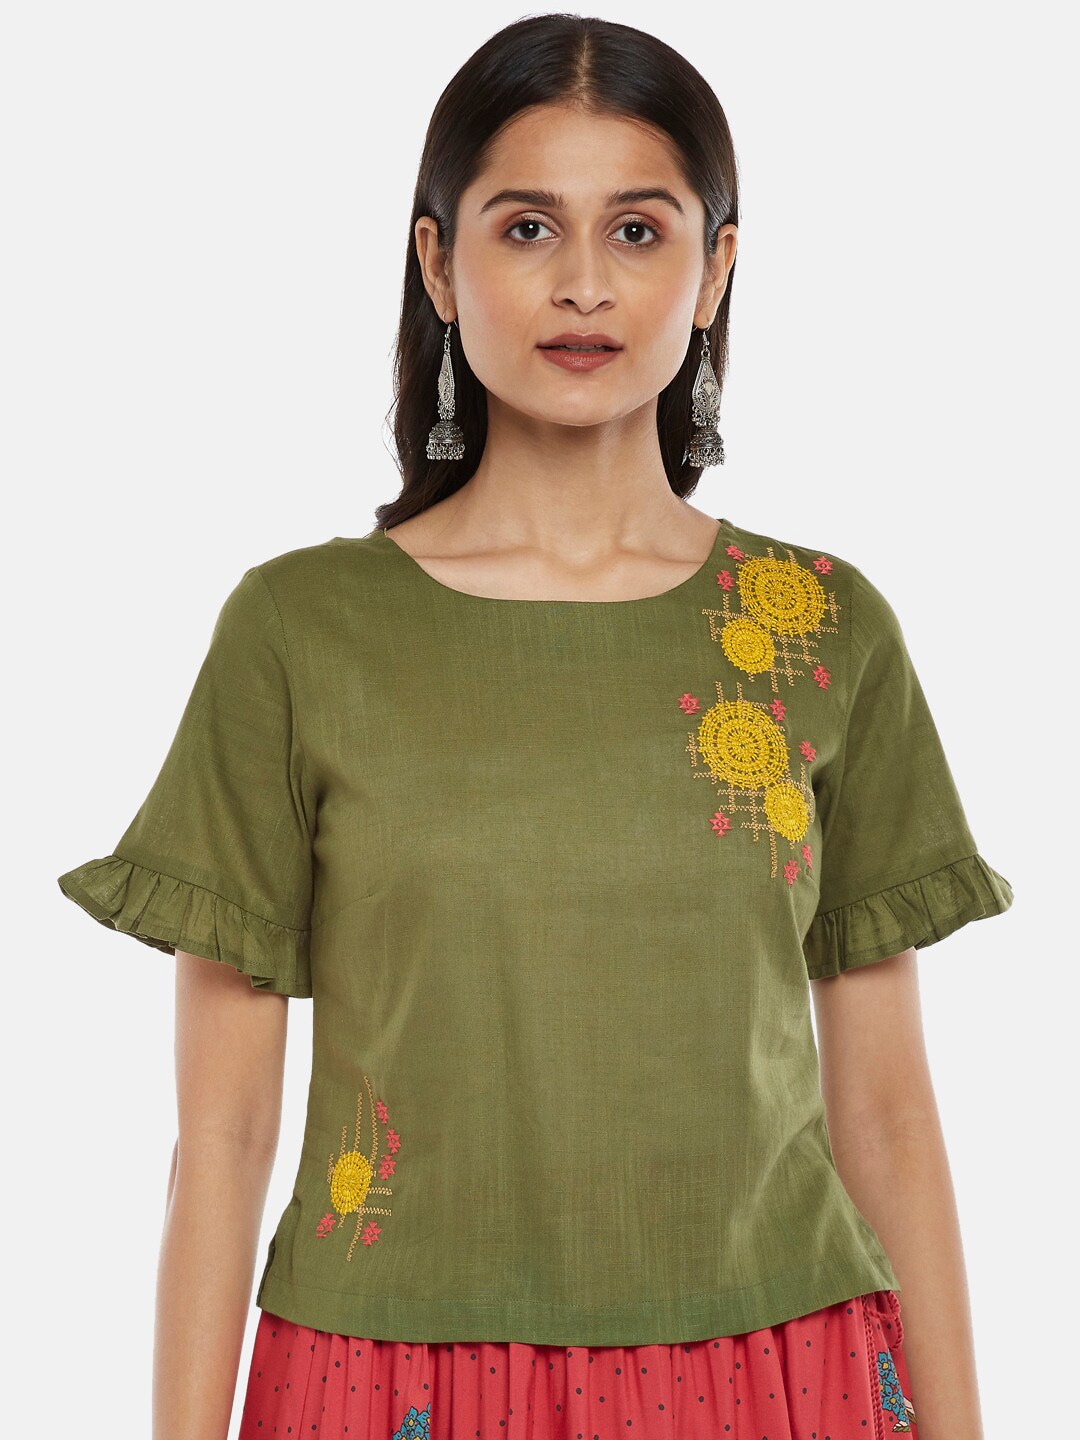 AKKRITI BY PANTALOONS Green Floral Top Price in India